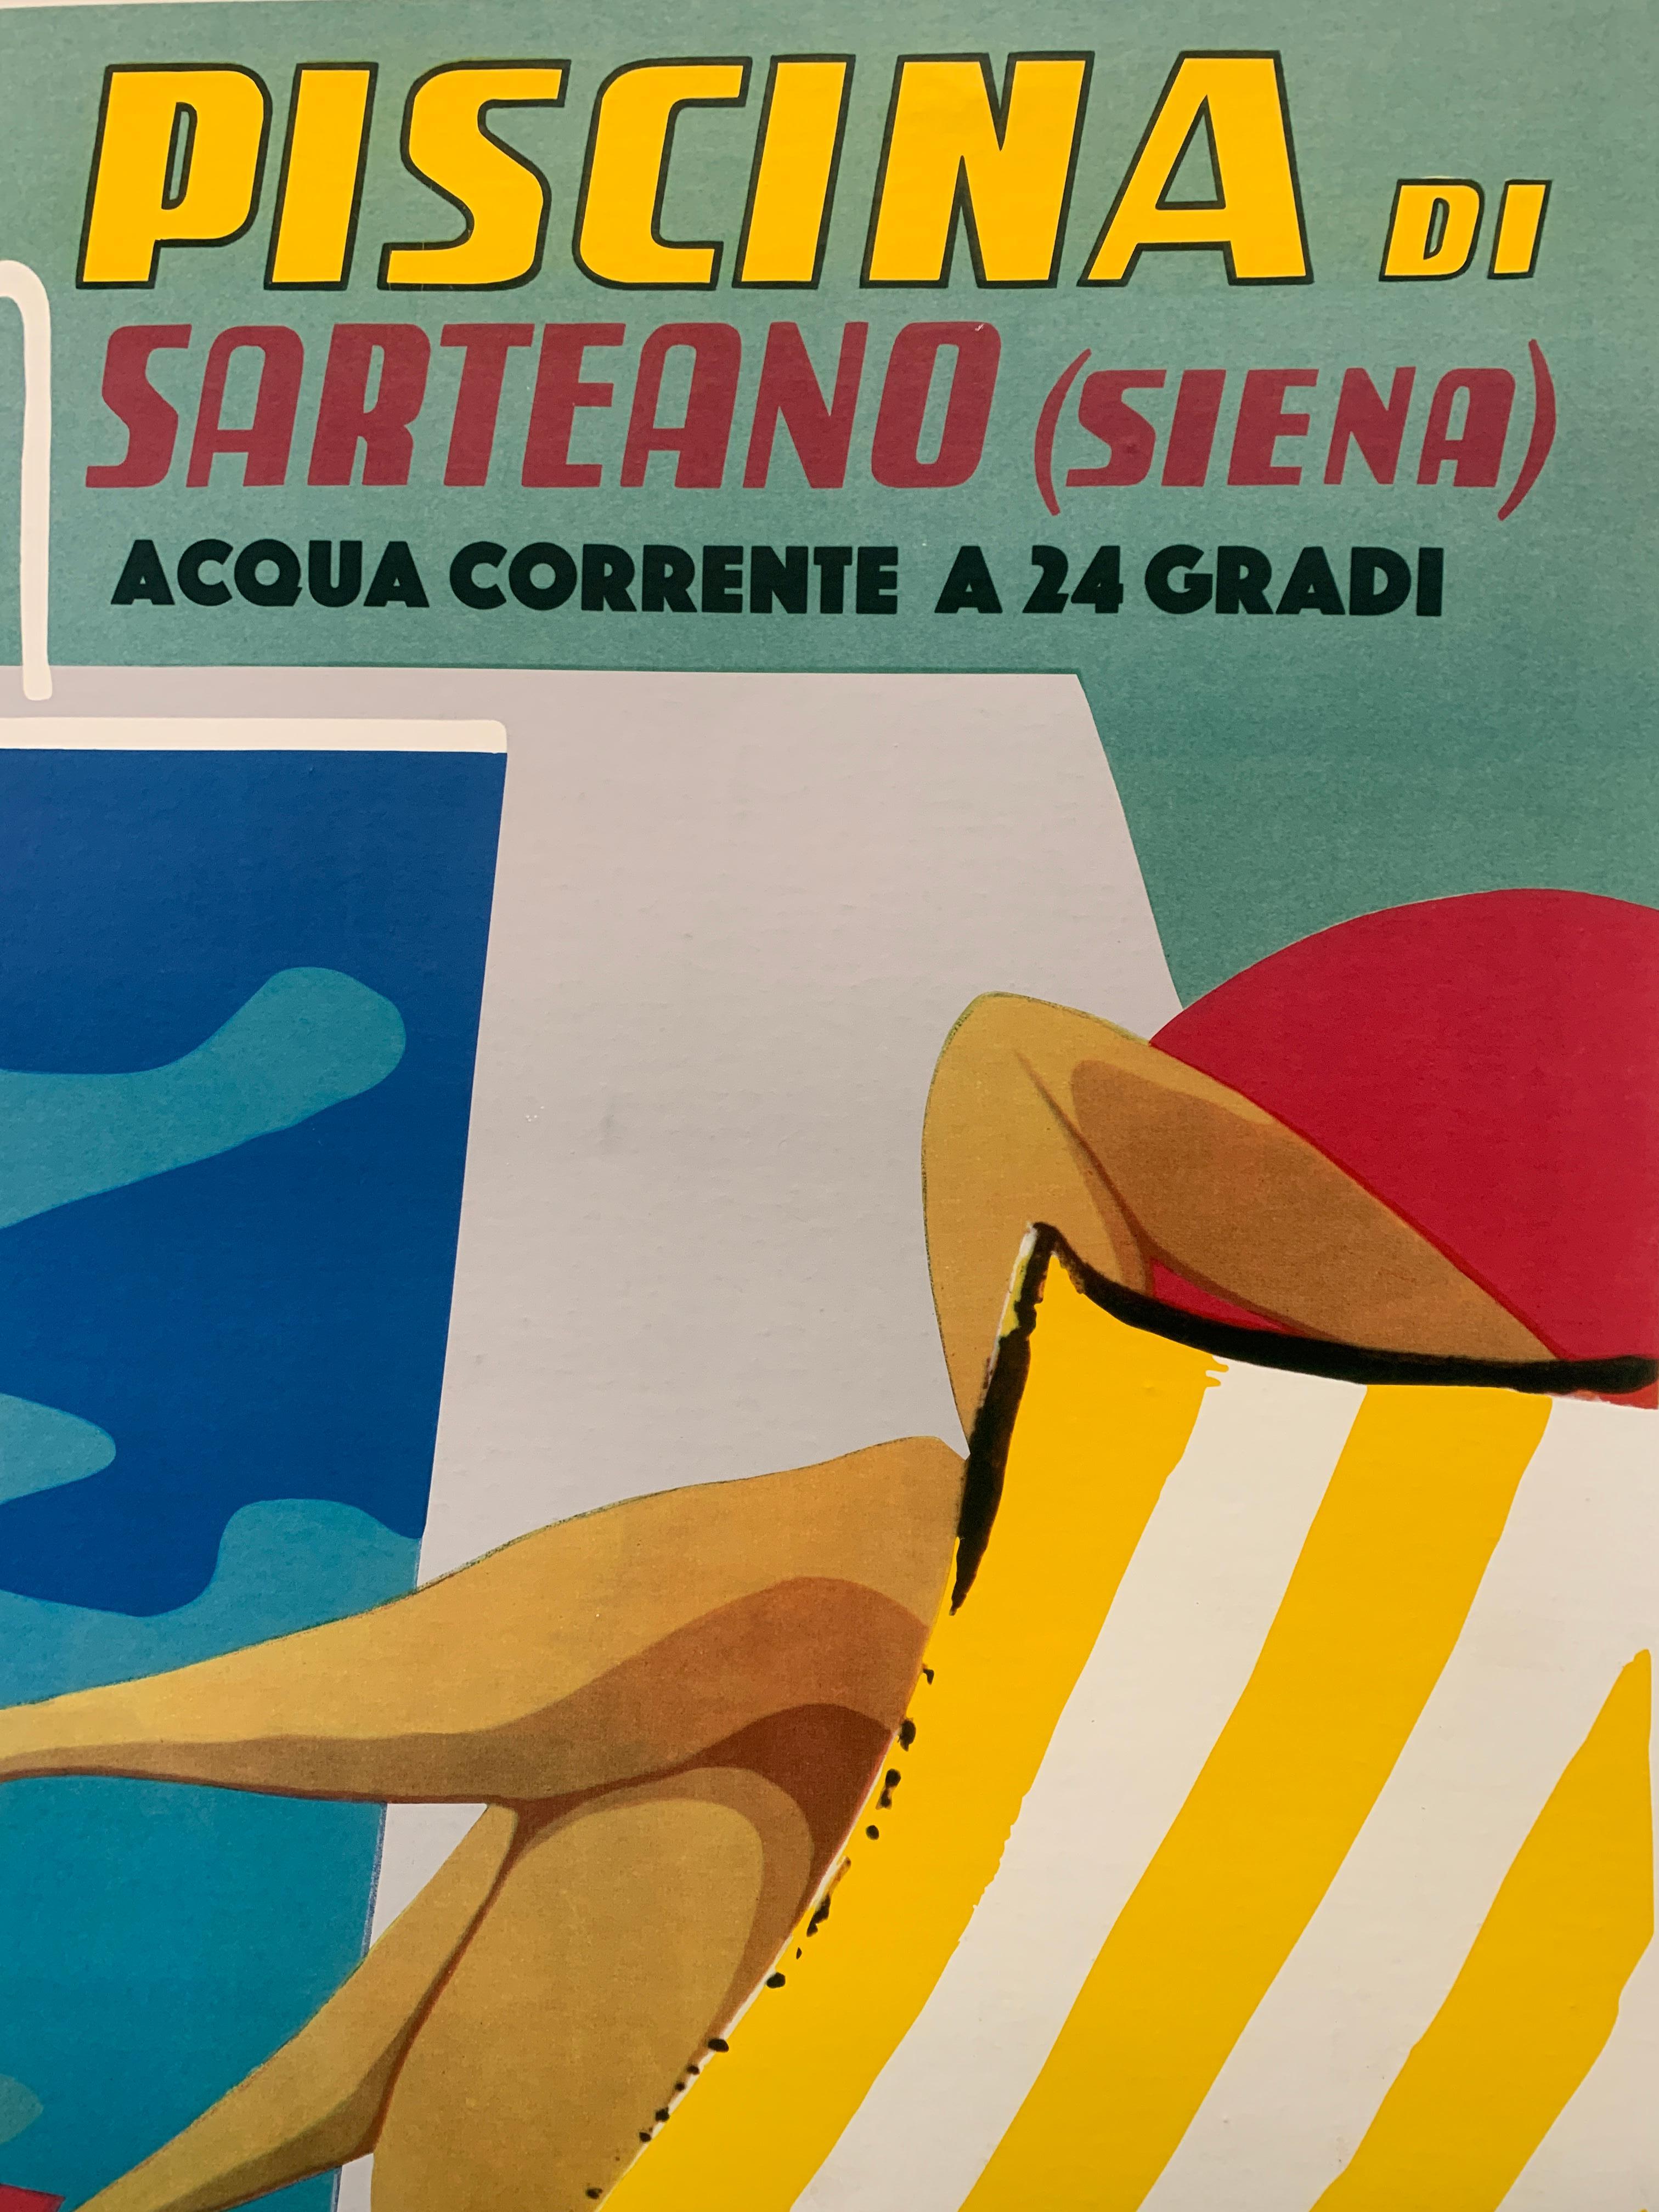 A charming poster which was created to promote a swimming pool in Italy that was open to the public. It is designed with a crisp graphic style to convey a sense of relaxation and elegance.

